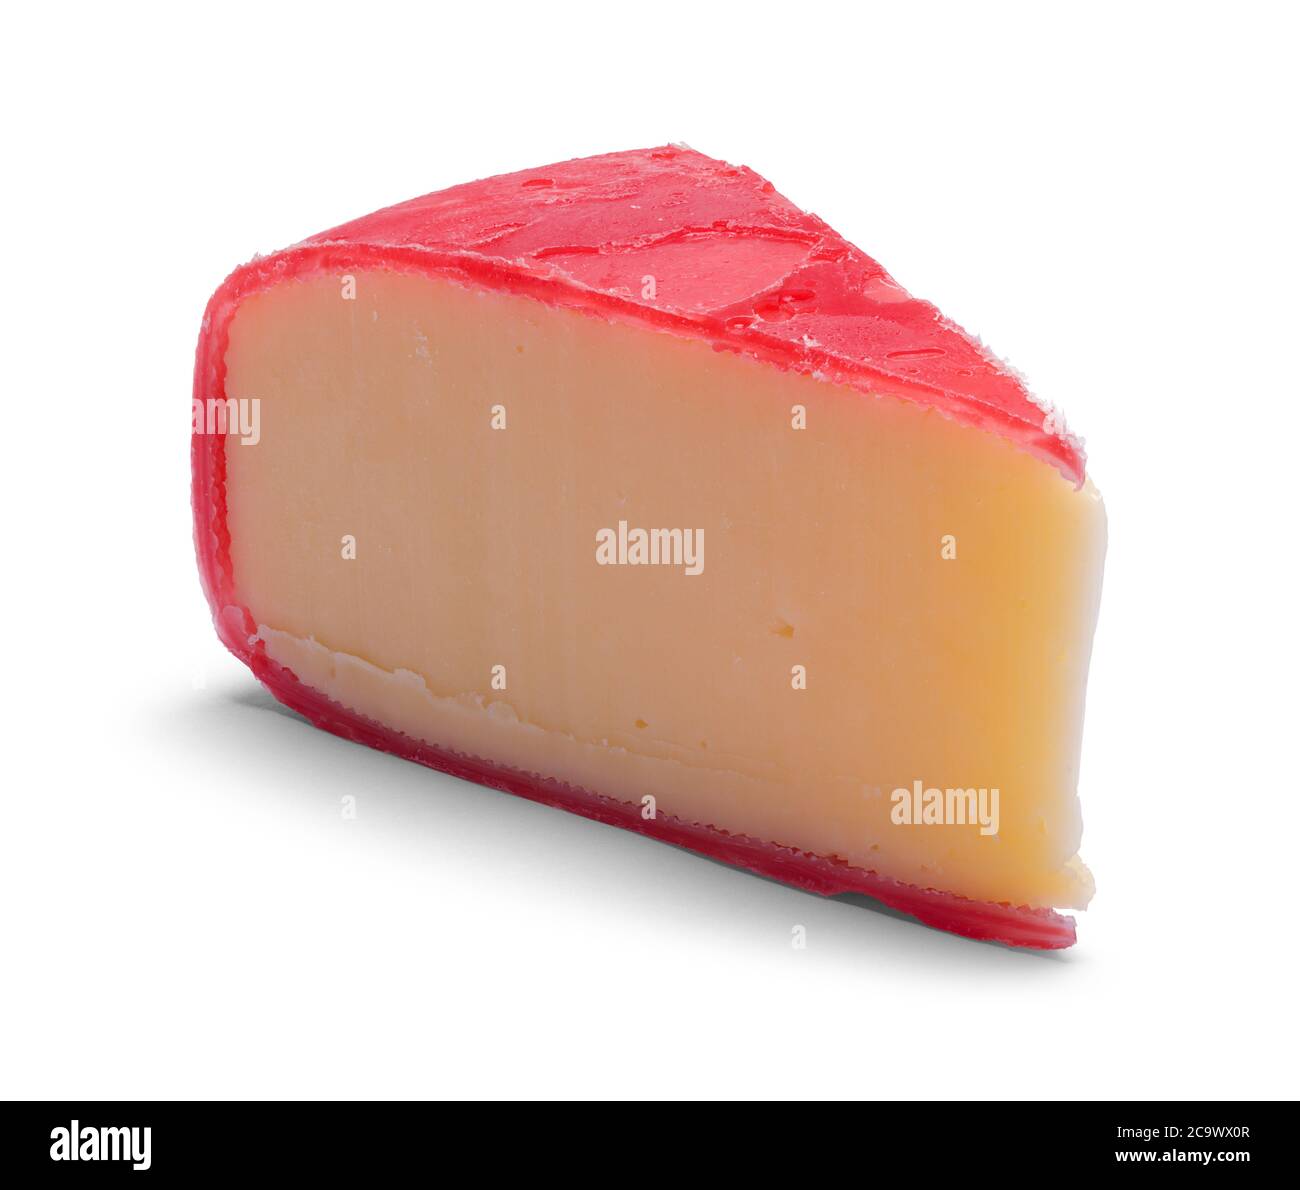 Slice of Gouda Cheese with Red Wax Isolated on White. Stock Photo